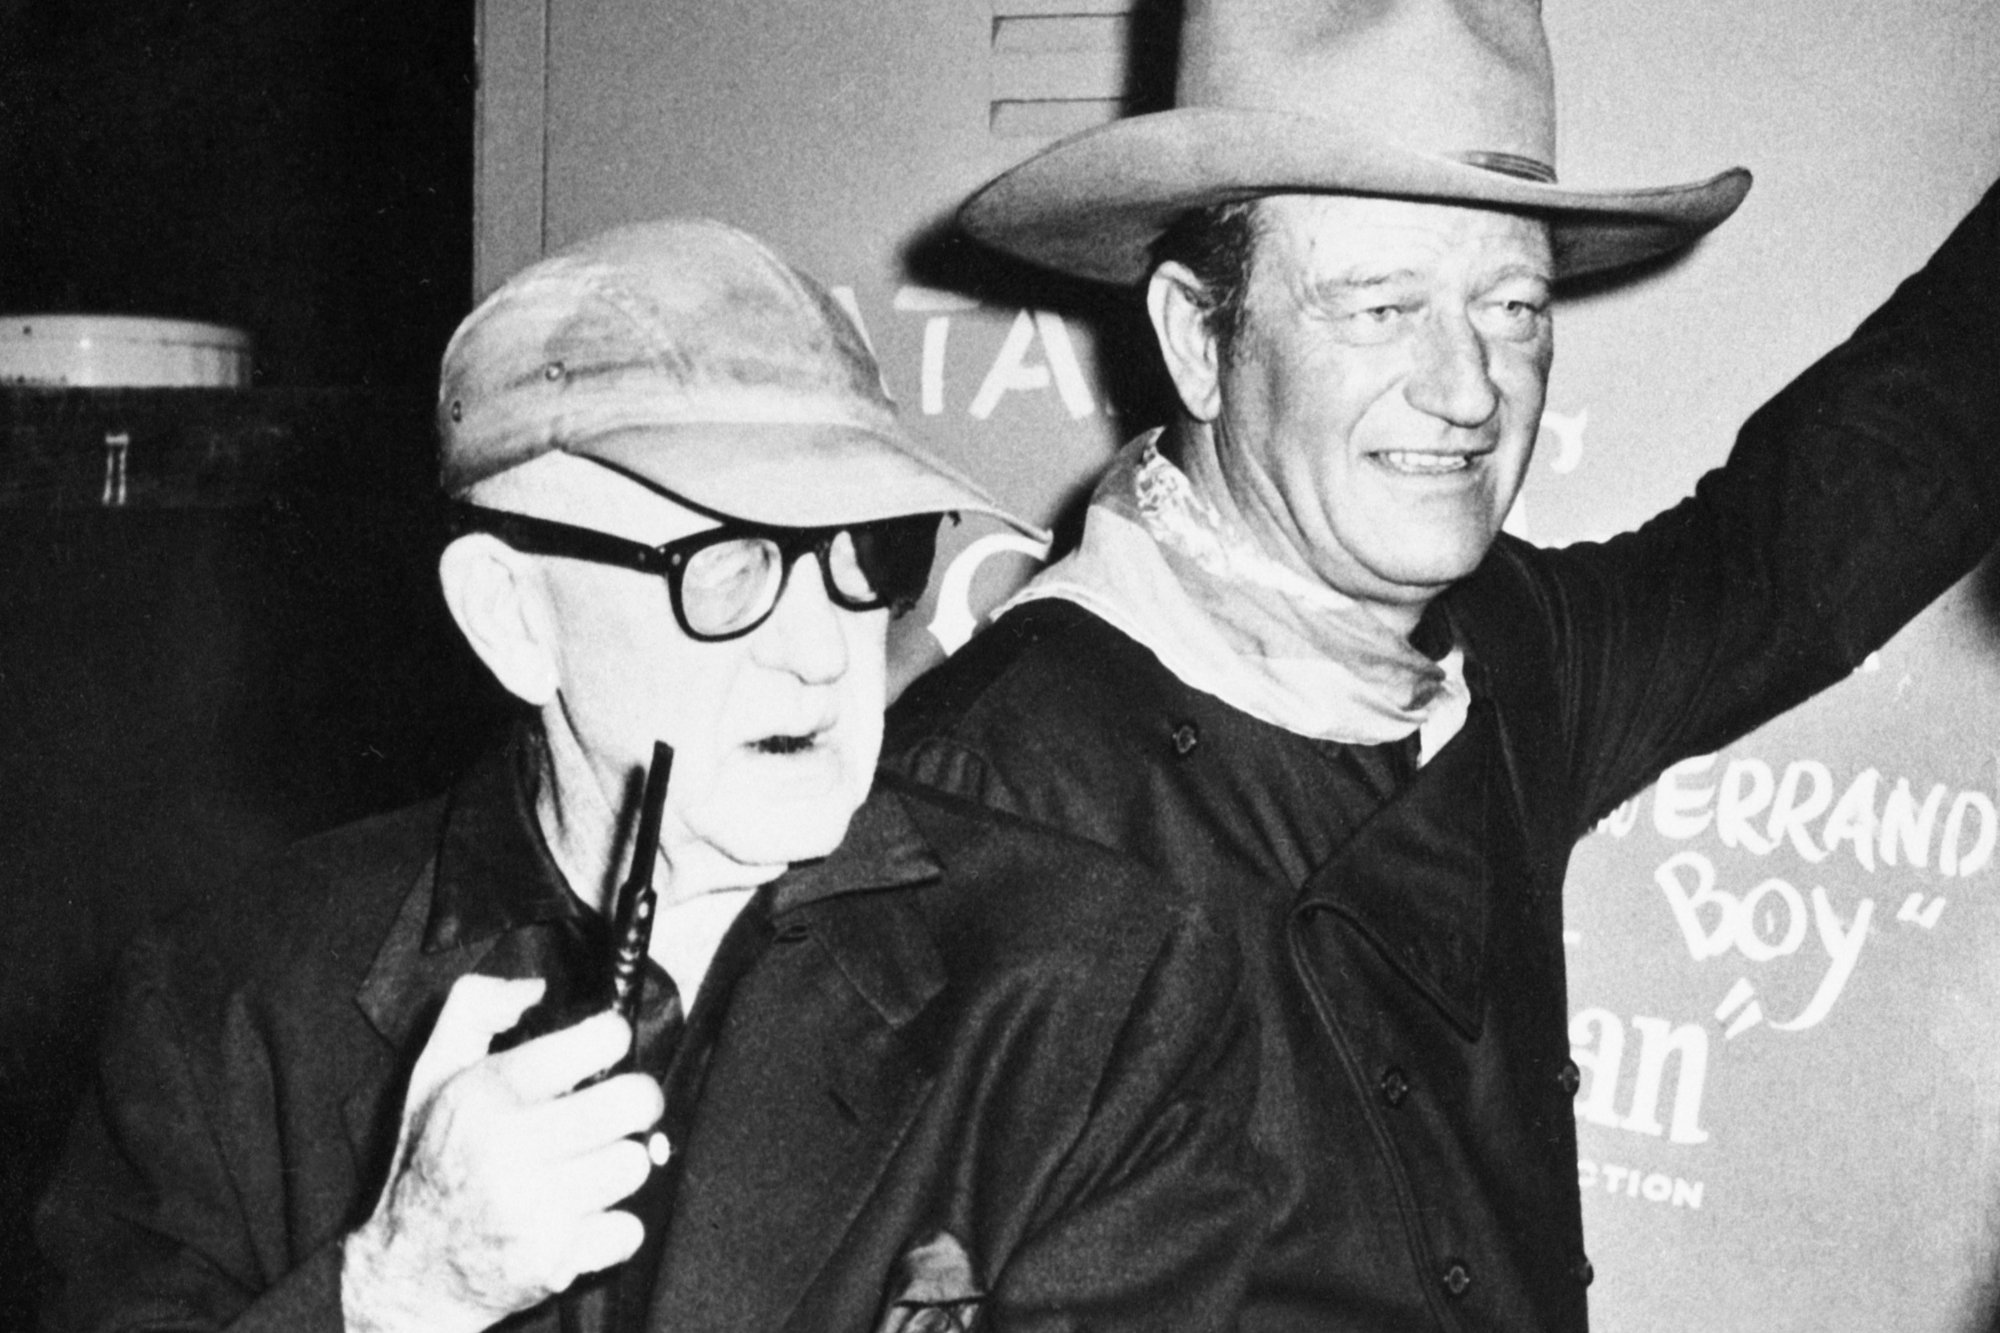 John Ford and John Wayne standing next to each other in a black-and-white photograph. Wayne is in-costume to start filming 'The Man Who Shot Liberty Valance'